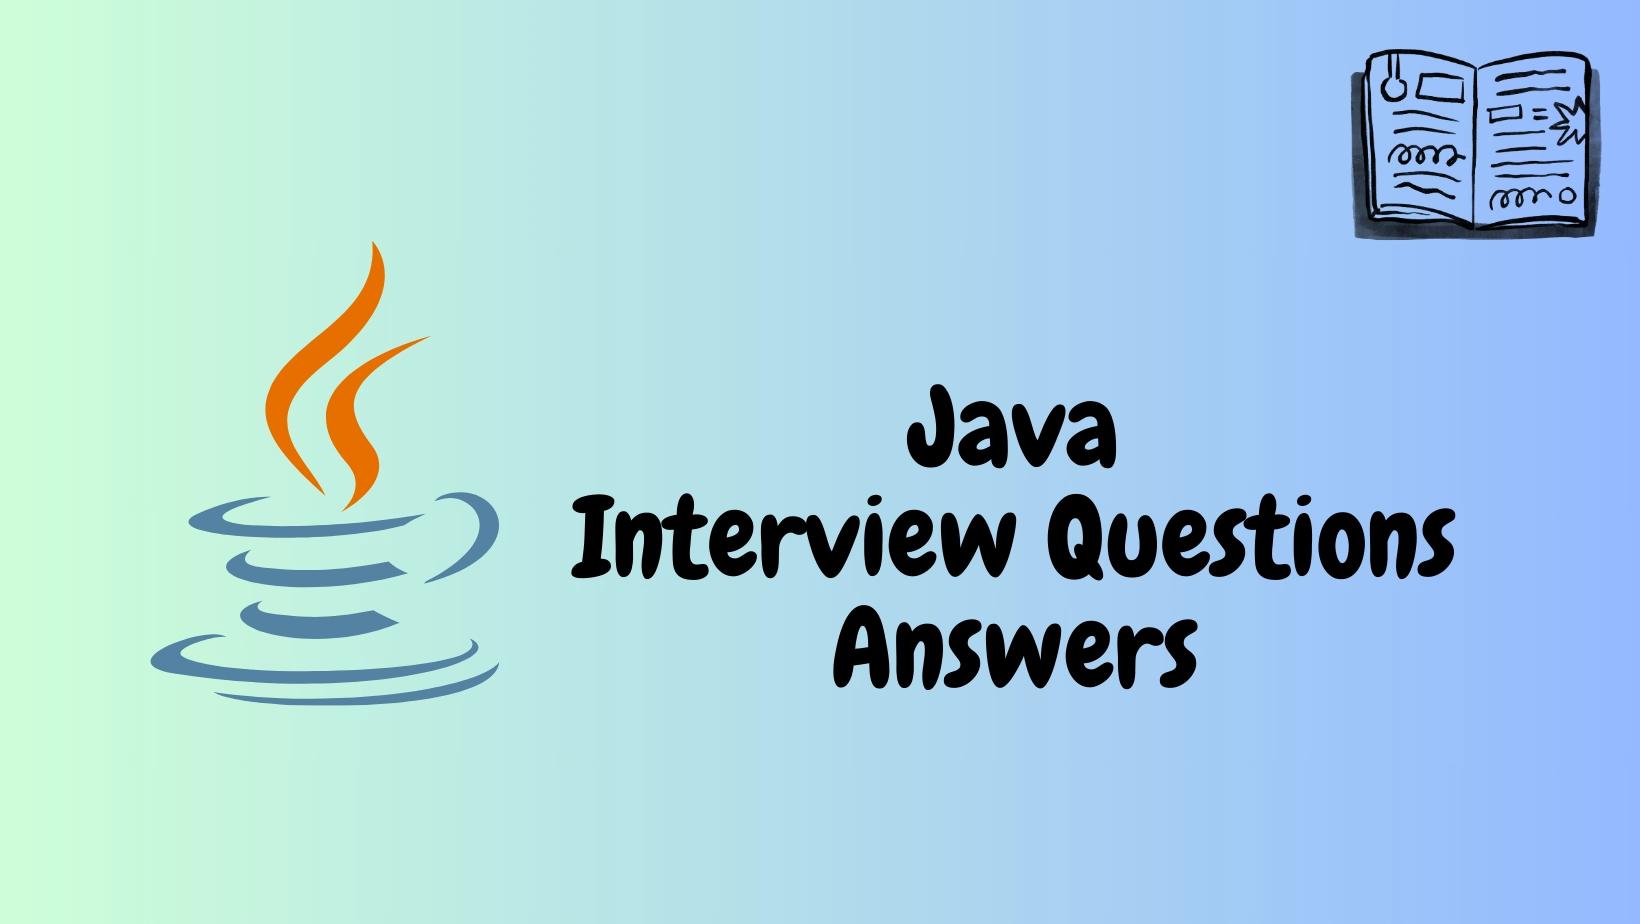 Java Job Interview Questions and Answers